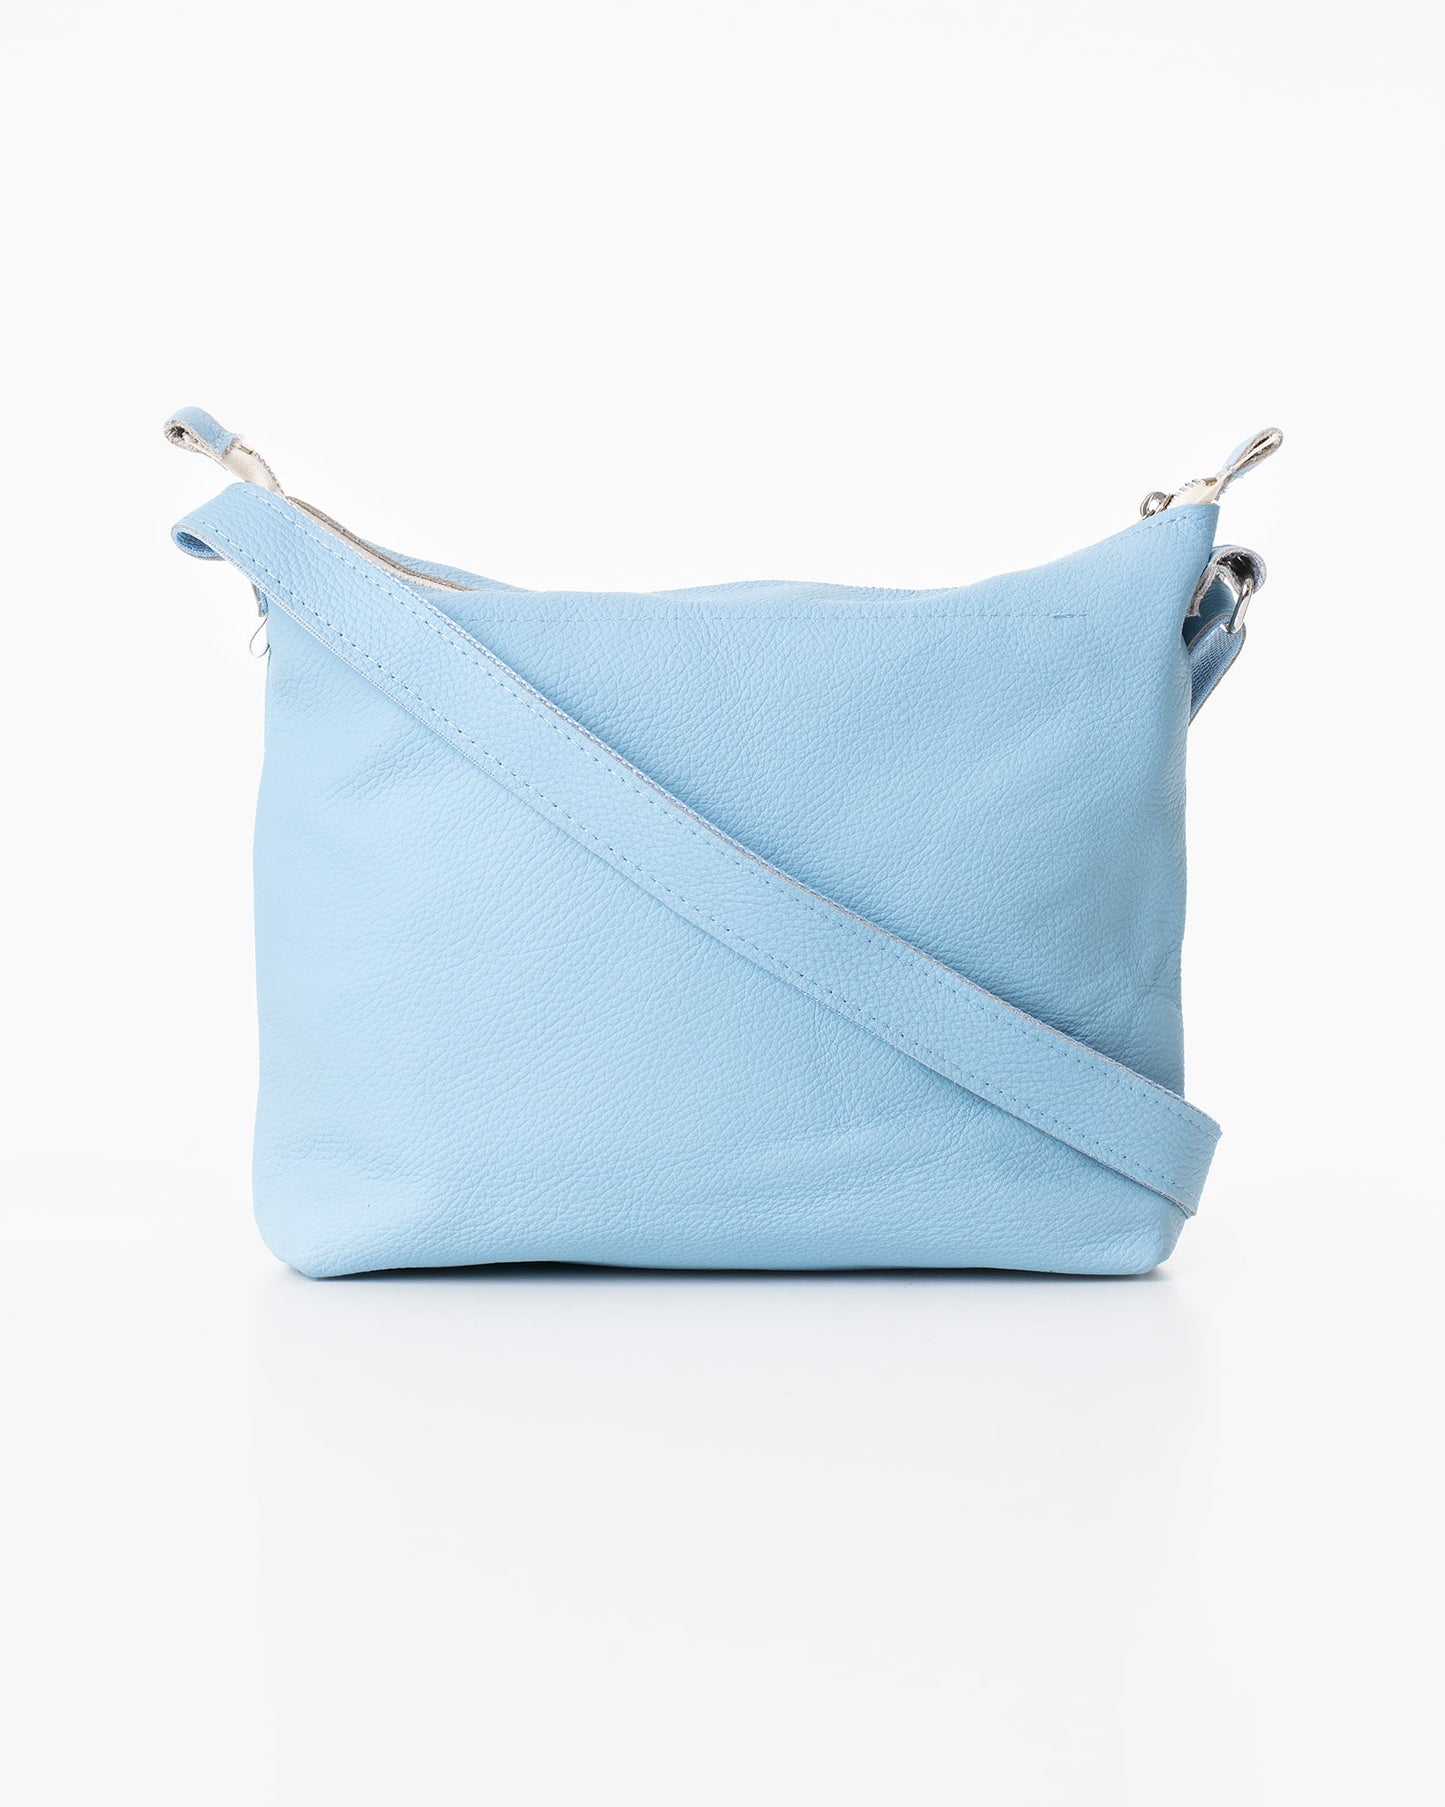 Handmade Anet L shoulder bag crafted from furniture industry leftovers, showcasing a light blue purse with a strap. Unique, eco-friendly, and durable design from Estonia.